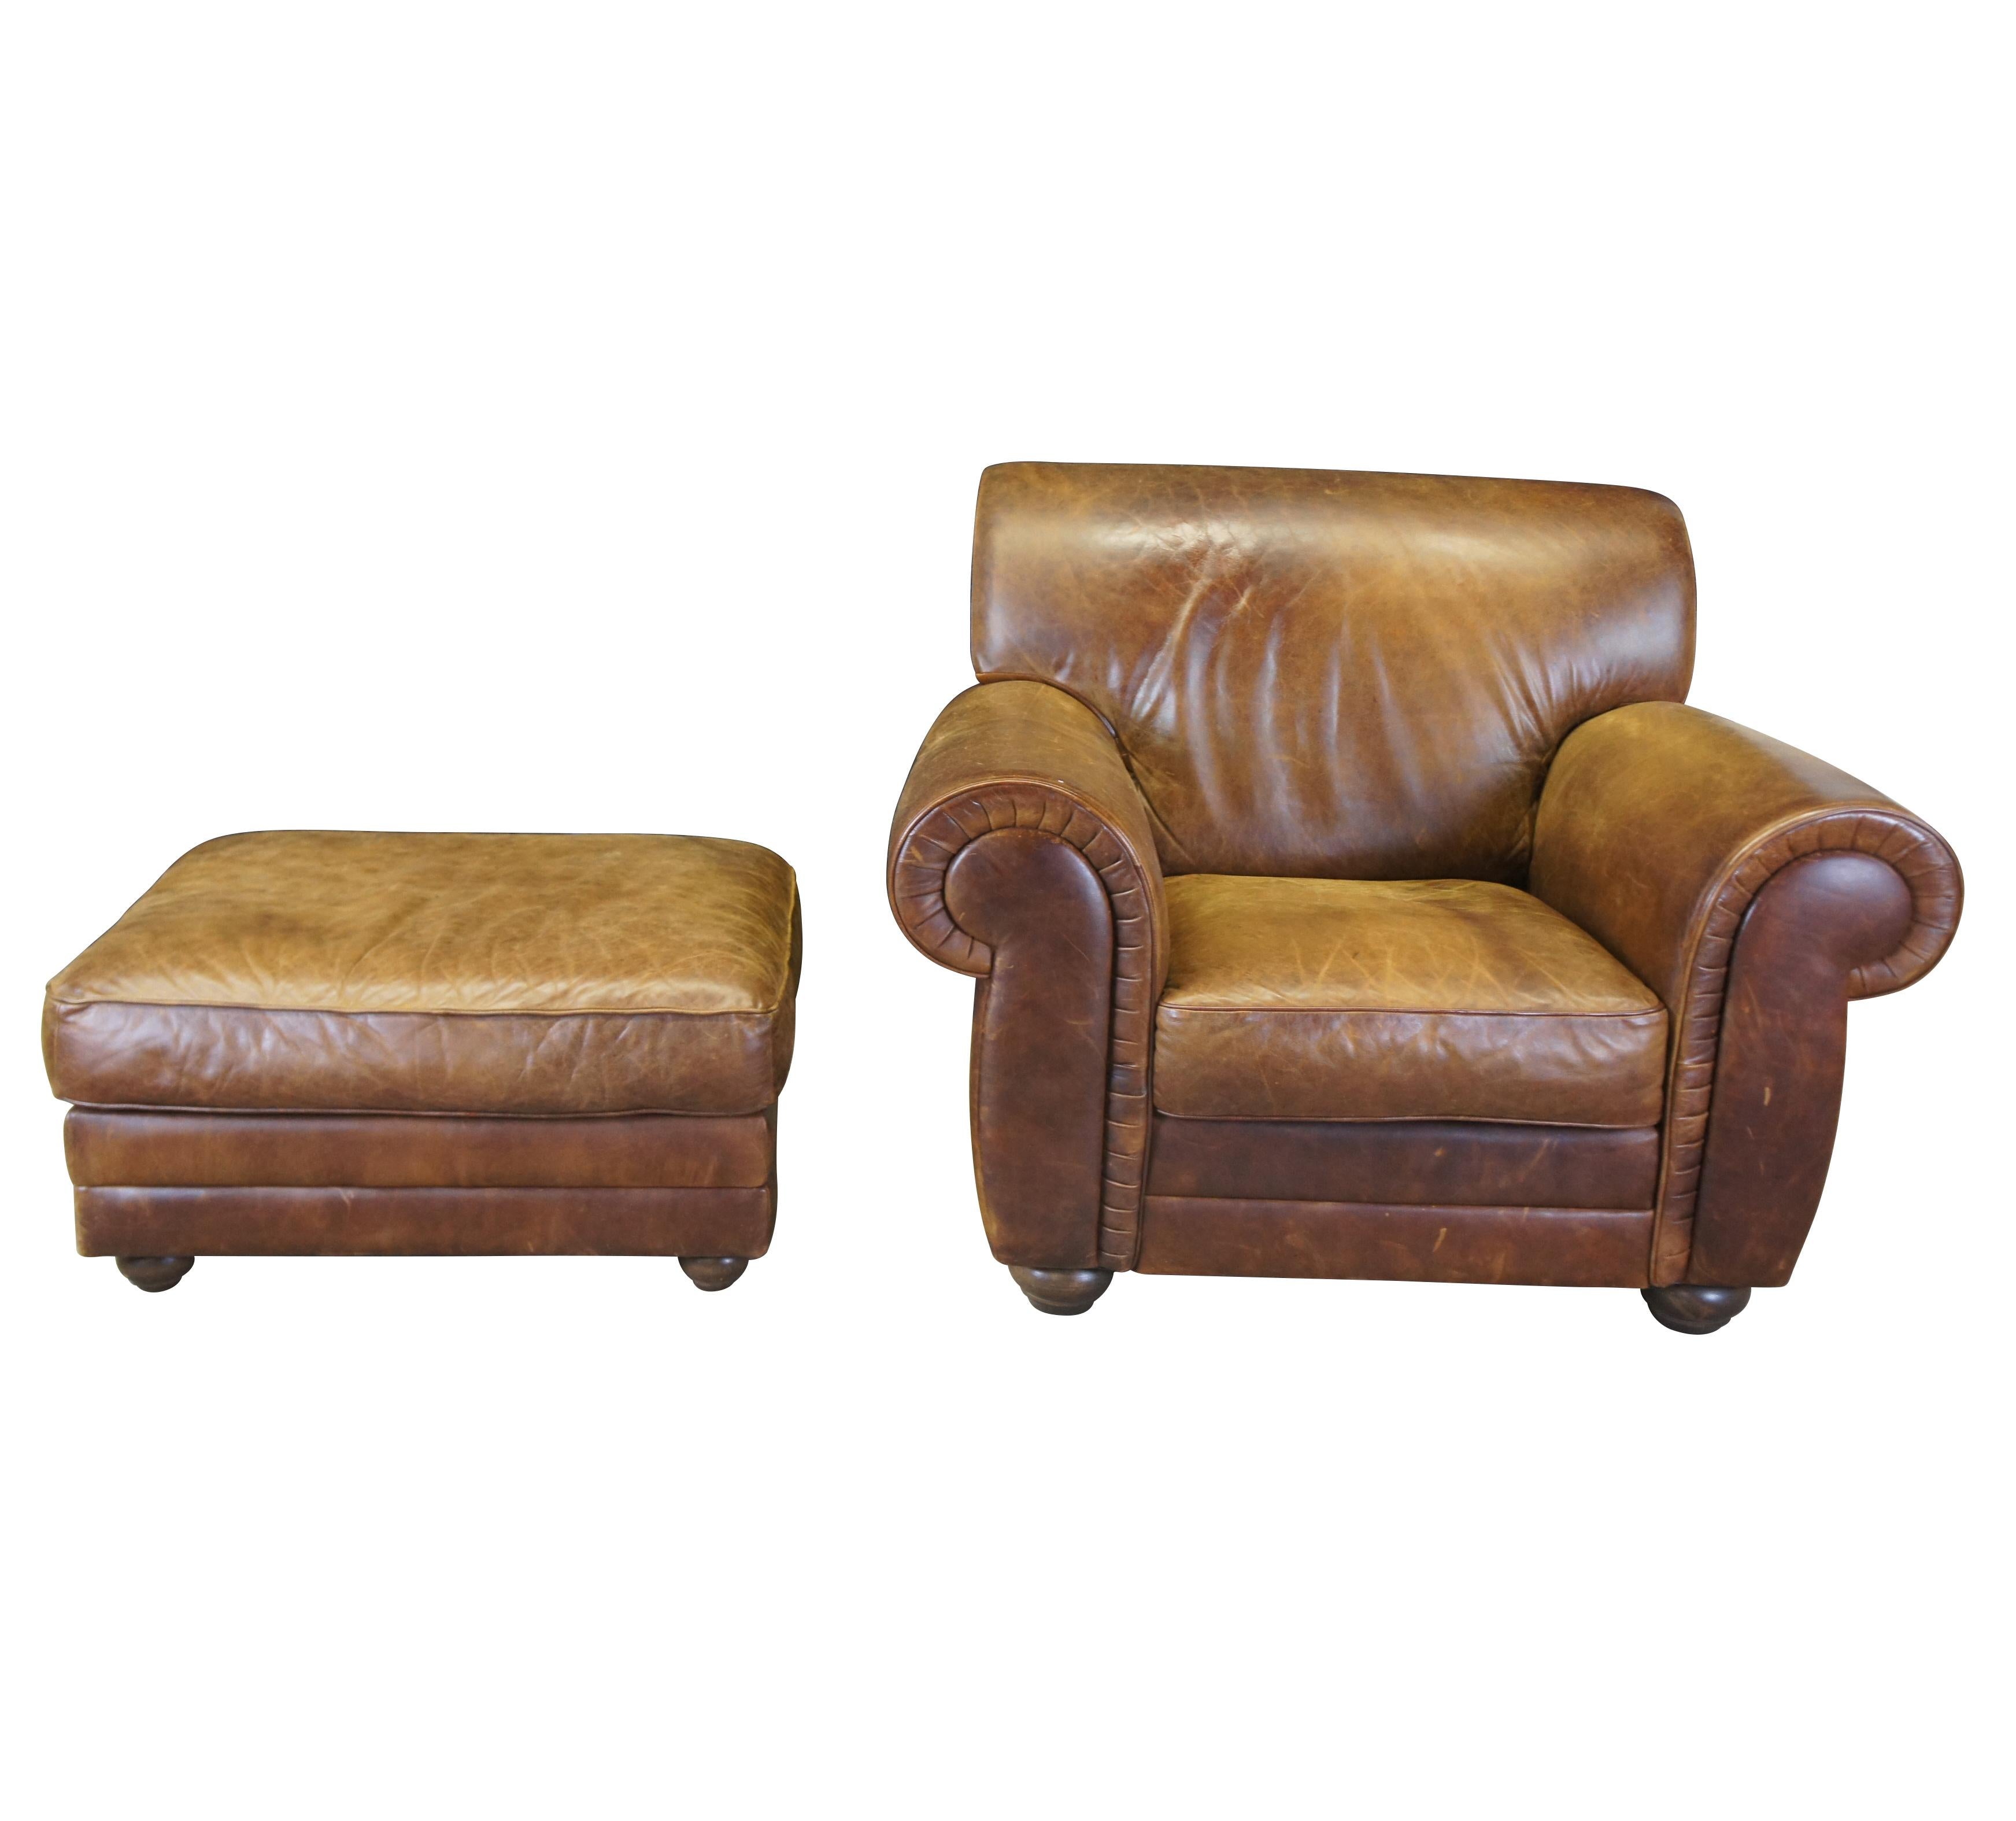 Vintage Natuzzi brown leather library club chair and ottoman featuring rolled arms and back, with bun feet and natural distressing. Made in Italy, circa 2000. 

Natuzzi Group is an Italian furniture company founded in 1959 by Pasquale Natuzzi, the